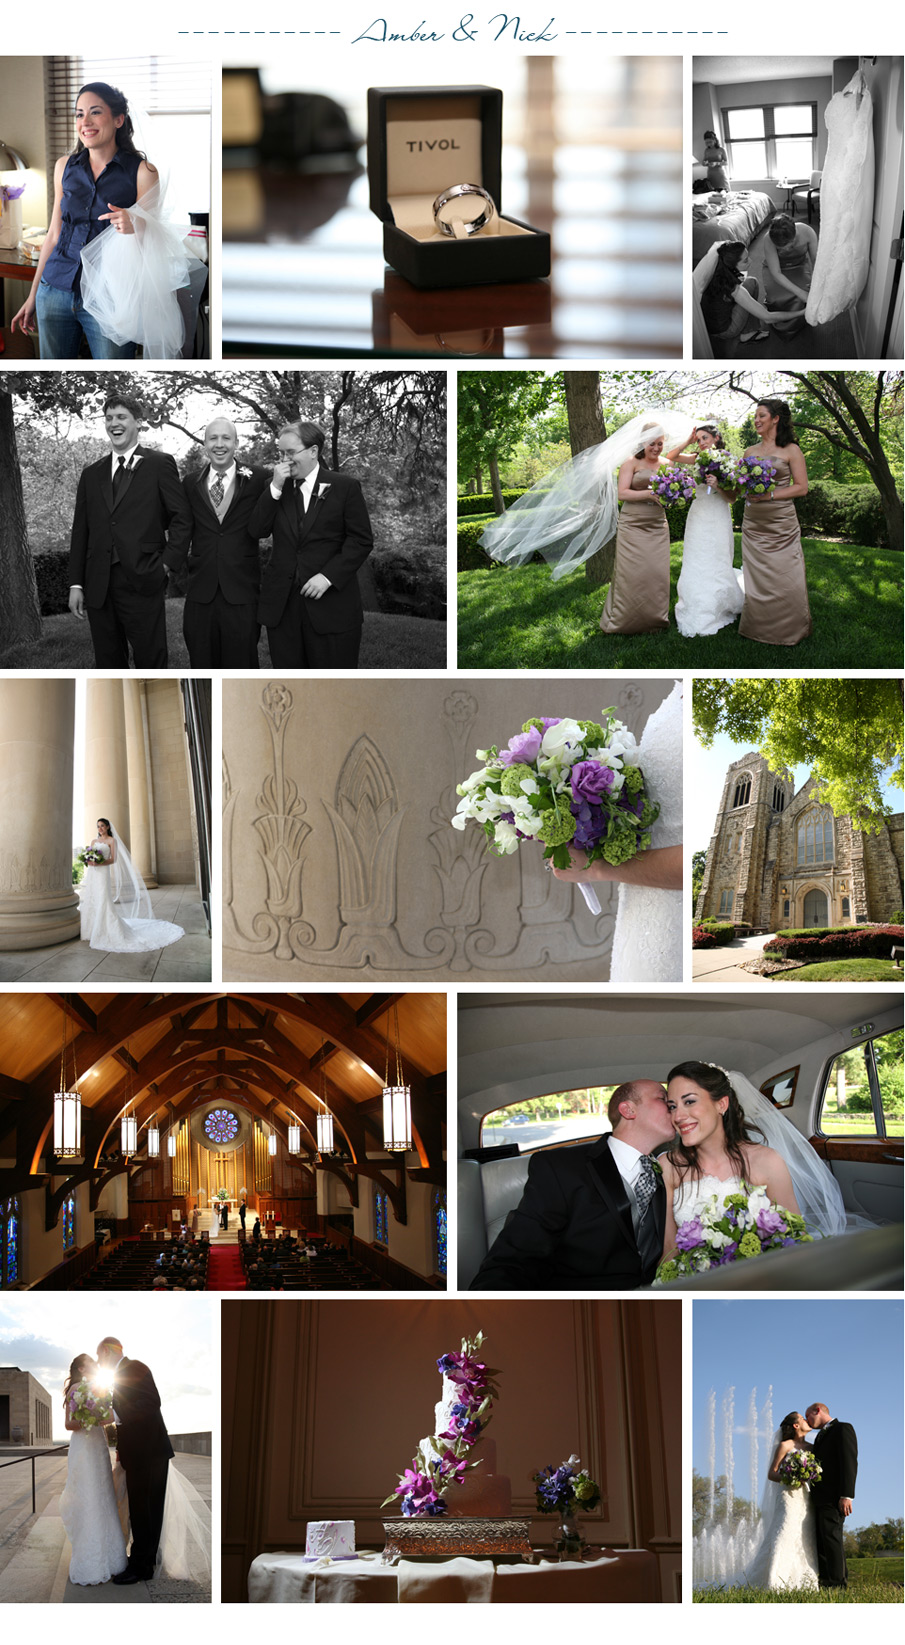 Amber and Nick's Kansas City wedding at the Central United Methodist Church and Hotel Phillips